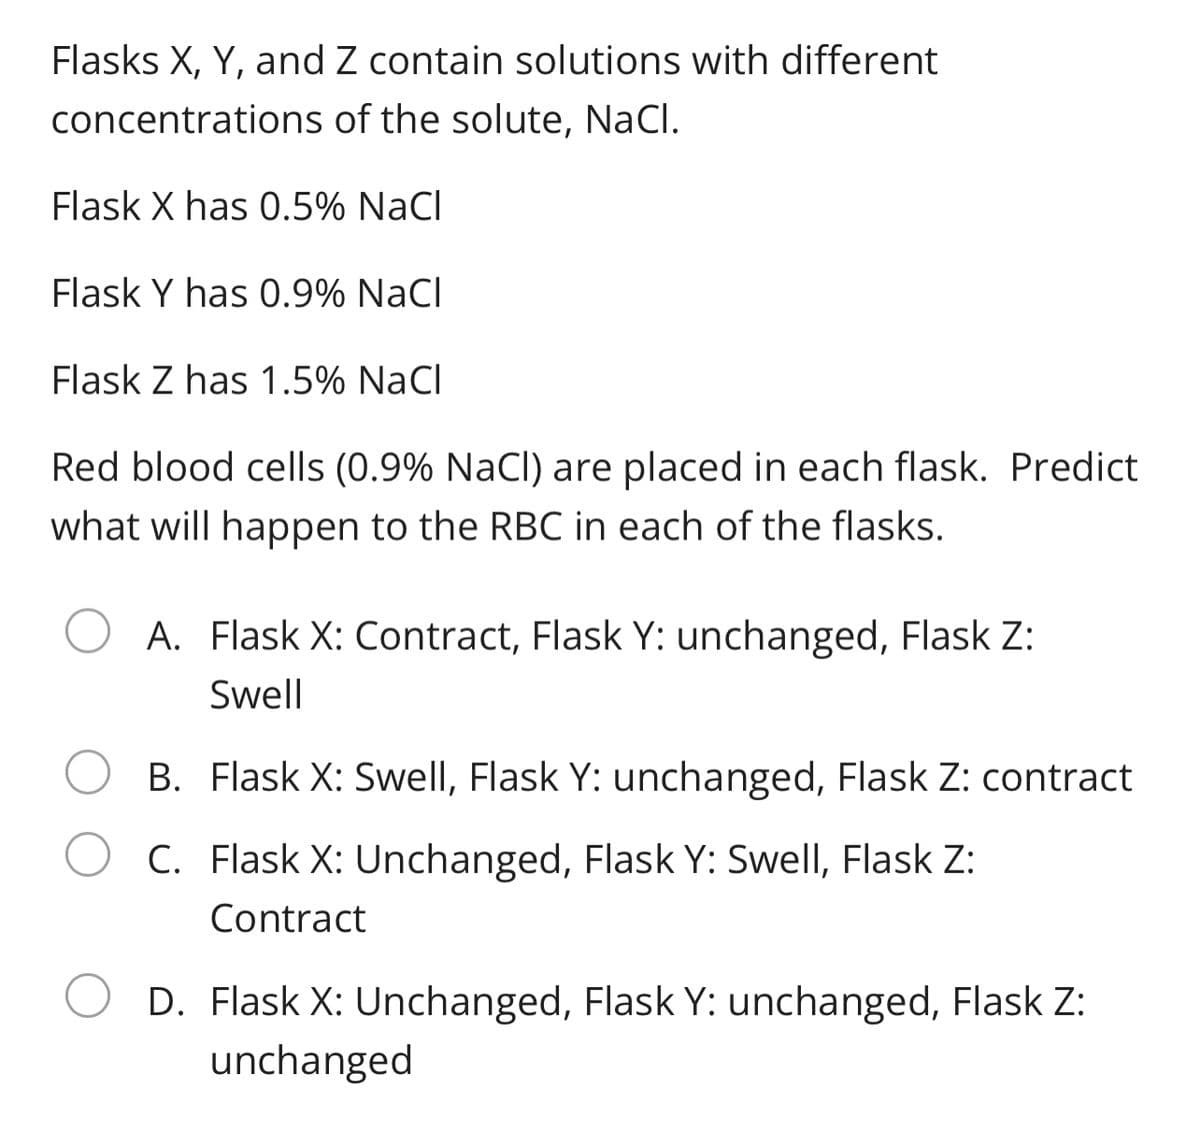 Flasks X, Y, and Z contain solutions with different
concentrations of the solute, NaCl.
Flask X has 0.5% NaCl
Flask Y has 0.9% NaCl
Flask Z has 1.5% NaCl
Red blood cells (0.9% NaCl) are placed in each flask. Predict
what will happen to the RBC in each of the flasks.
A. Flask X: Contract, Flask Y: unchanged, Flask Z:
Swell
B. Flask X: Swell, Flask Y: unchanged, Flask Z: contract
C. Flask X: Unchanged, Flask Y: Swell, Flask Z:
Contract
D. Flask X: Unchanged, Flask Y: unchanged, Flask Z:
unchanged
